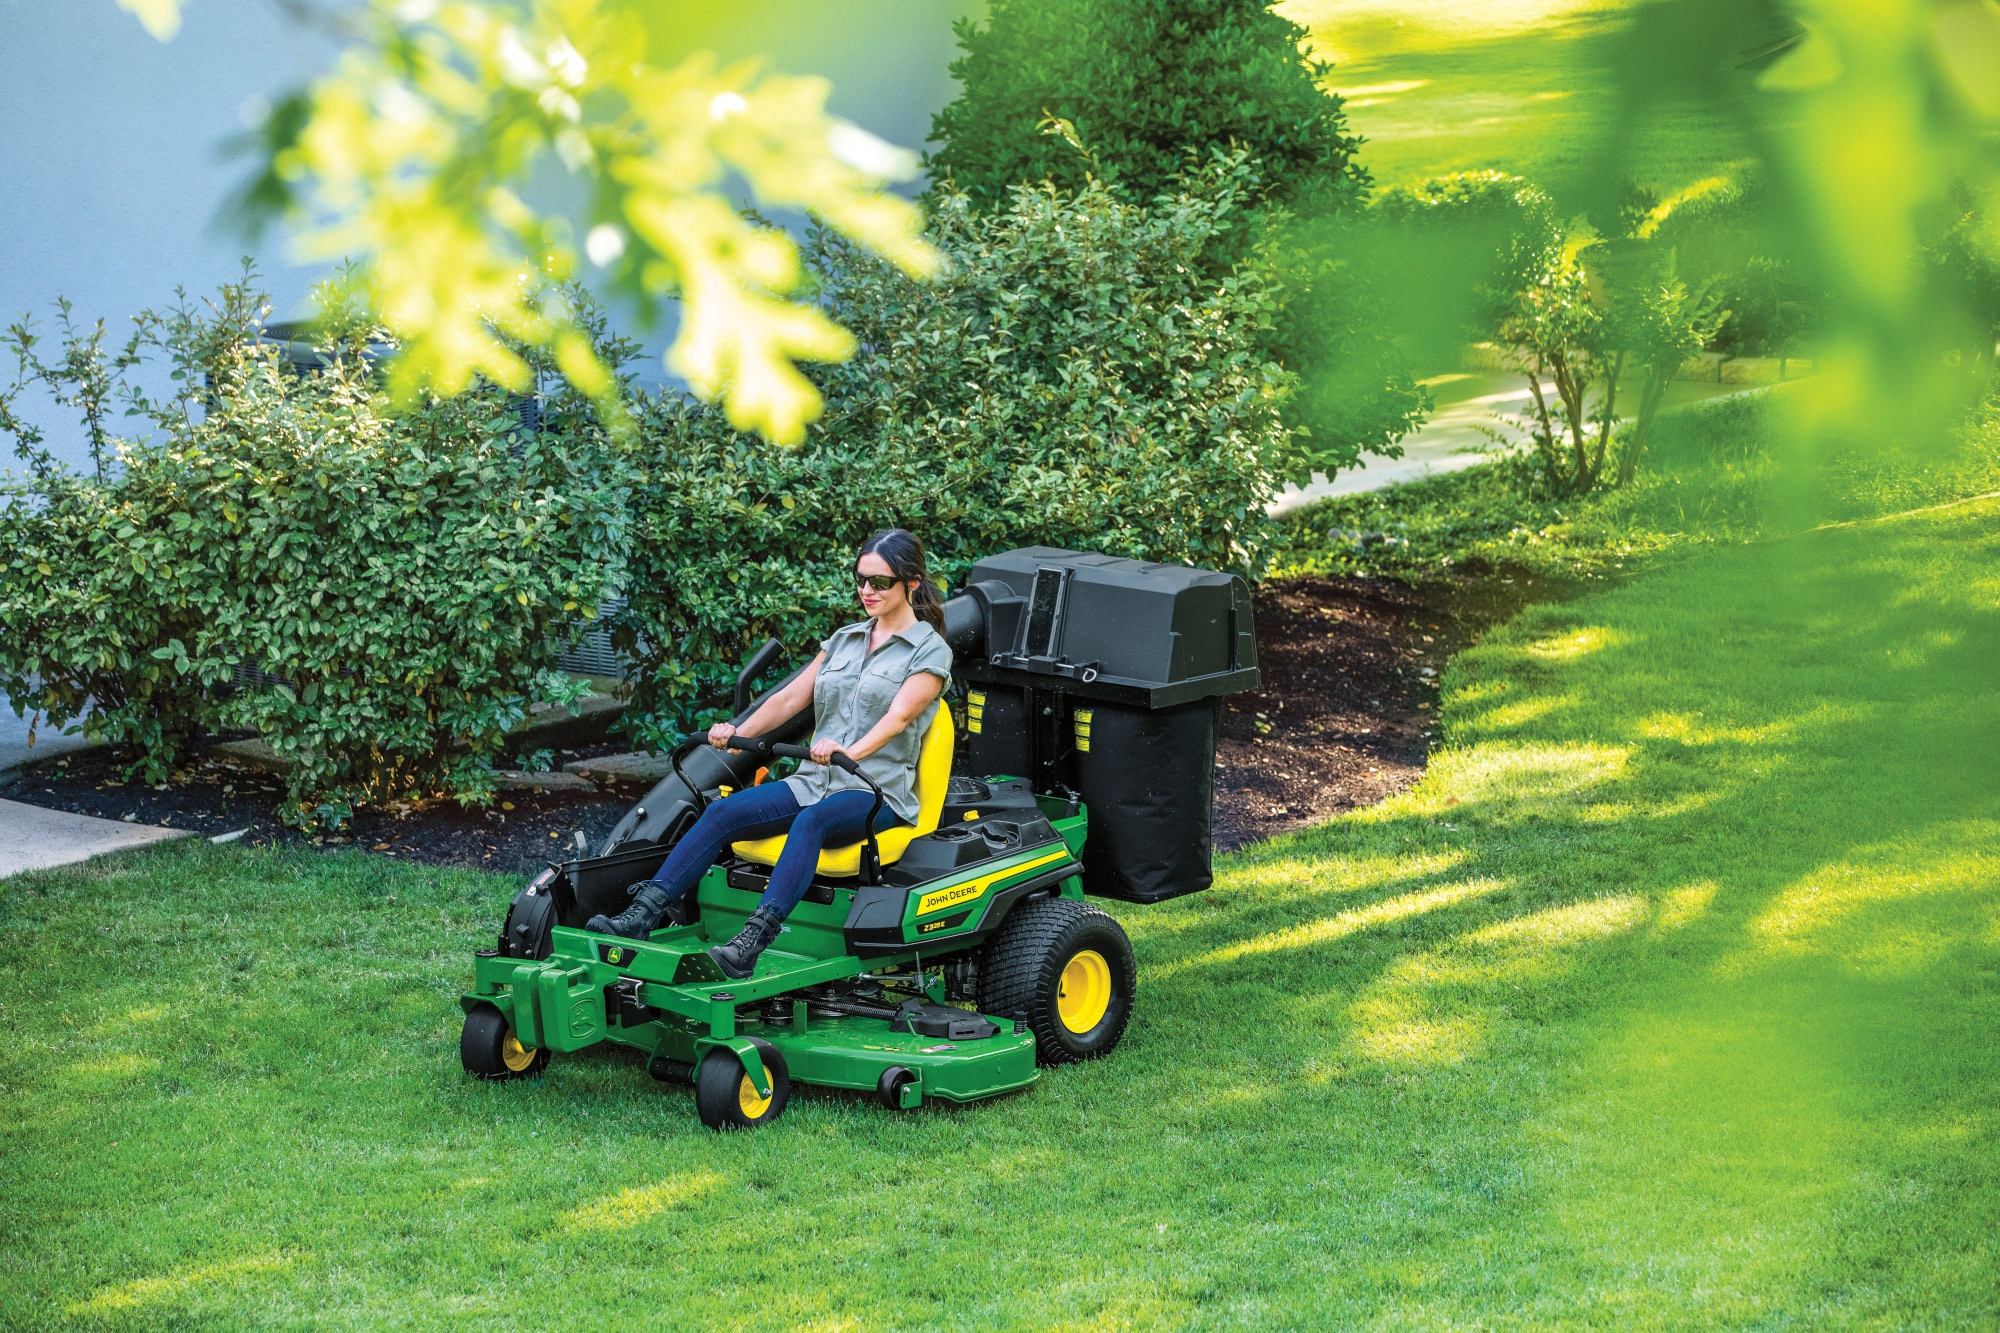 John Deere X540 TRACTOR MULTI-TERRAIN SERIES (With 54 inch Mower Deck)  -PC9527 Blower Housing,48C: Two-Bag Power Flow Material Collection